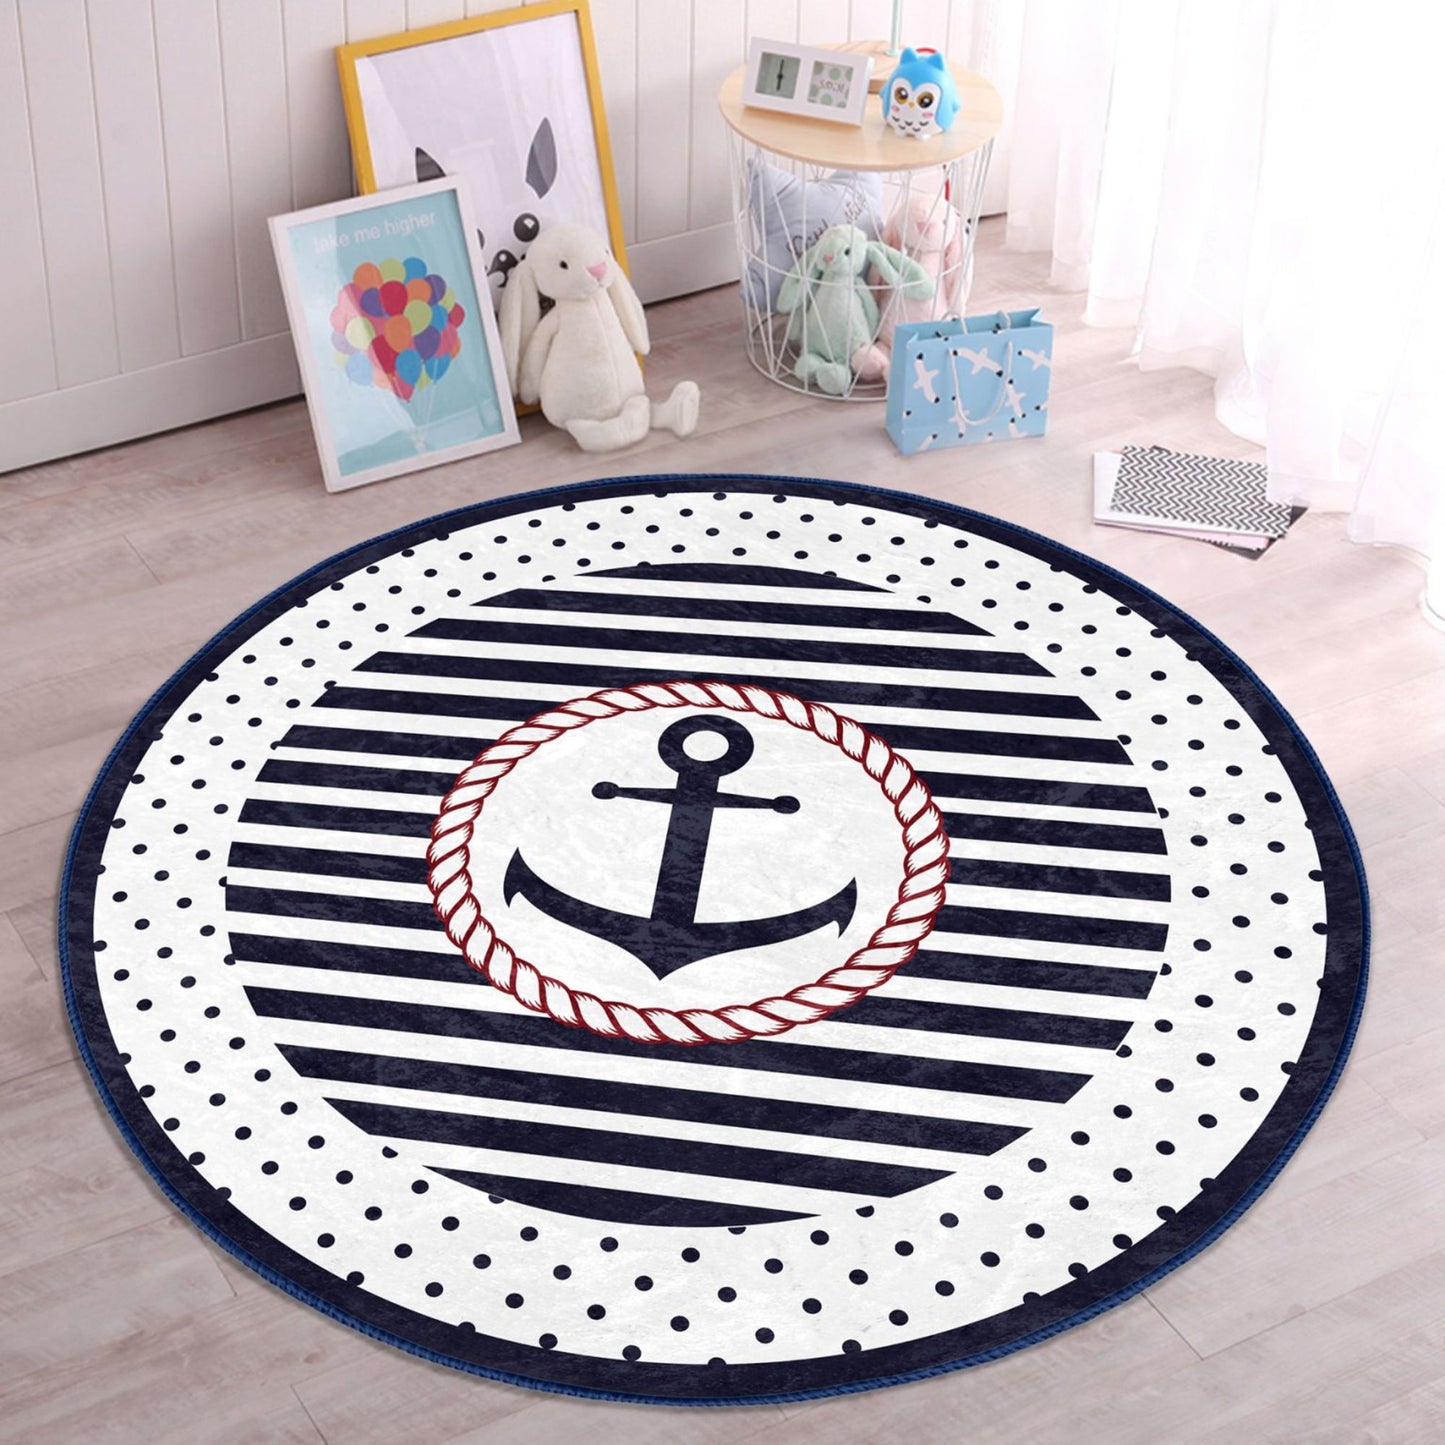 Rug with Whimsical Anchor Illustrations